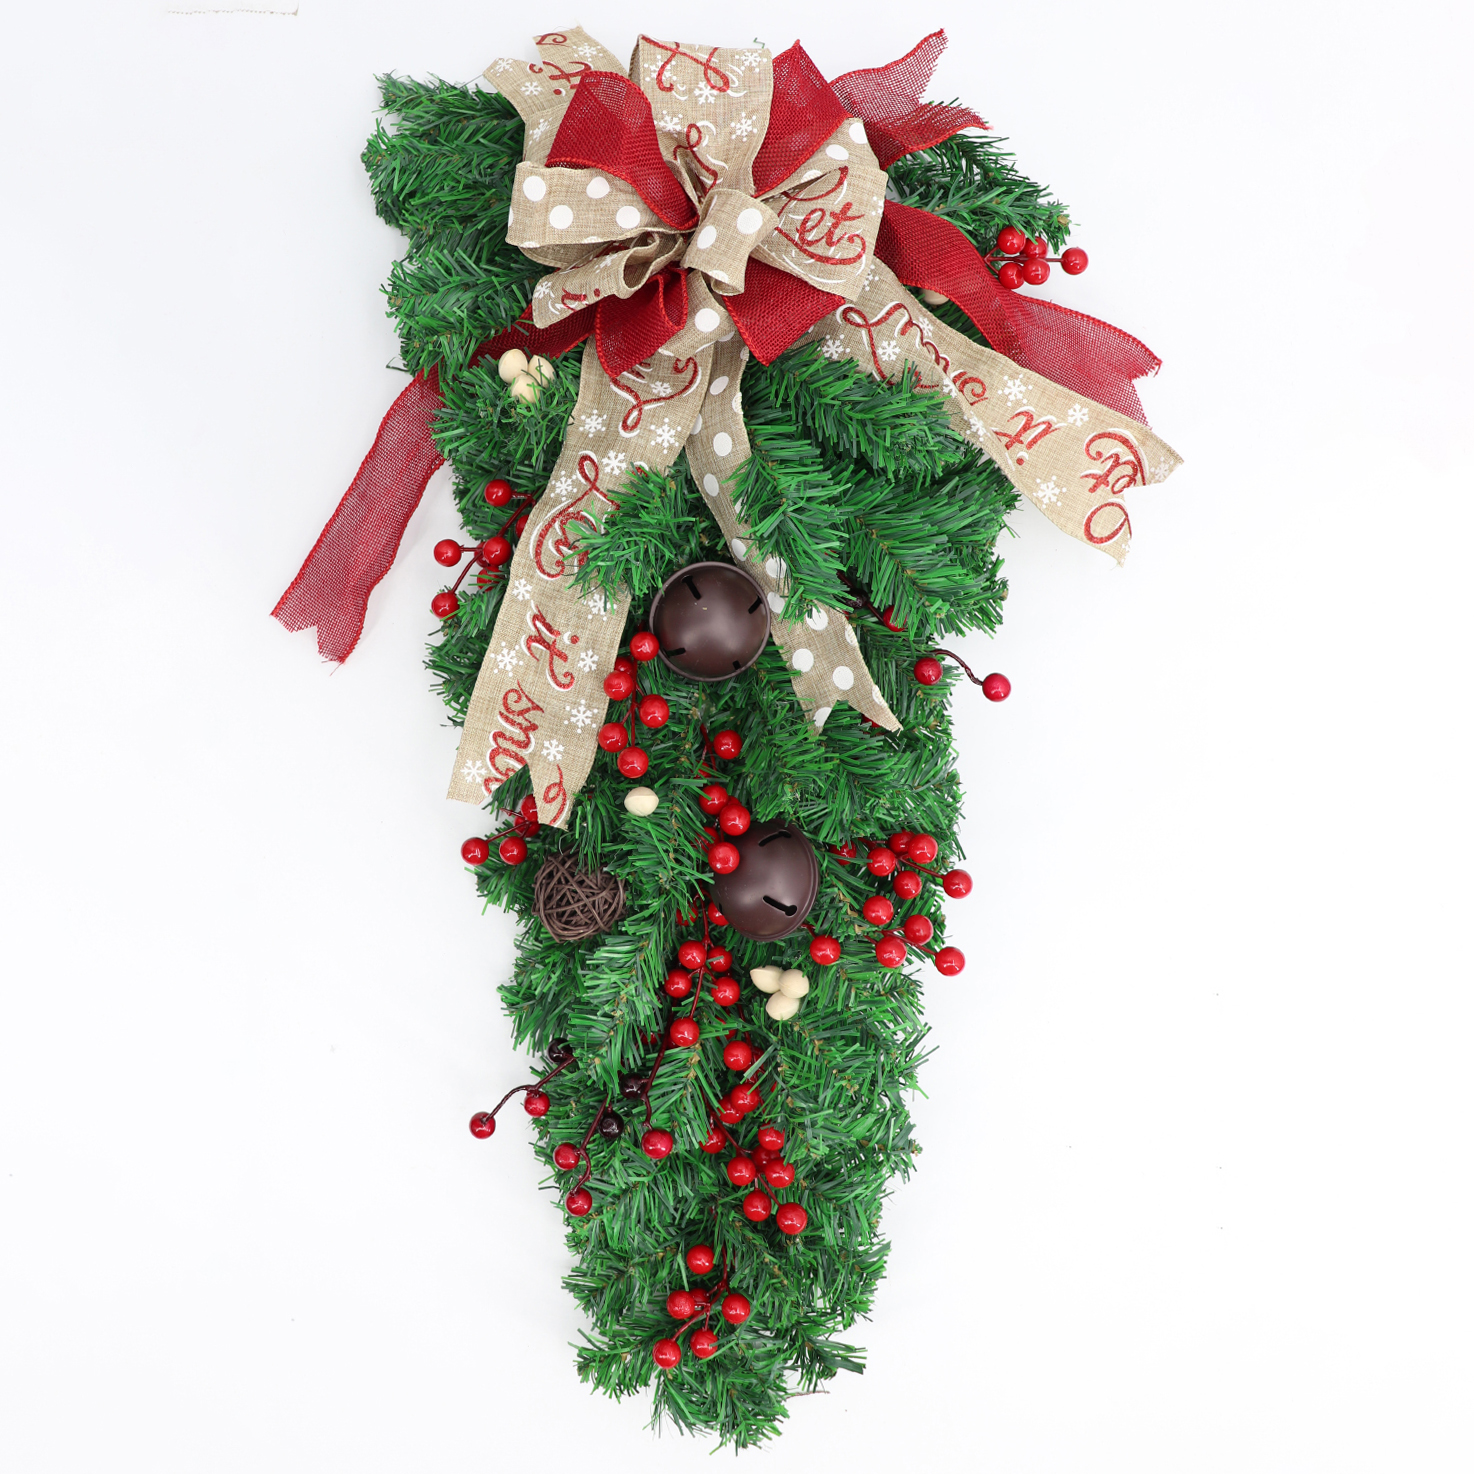 70cm Christmas Hanging Swag Wreath Tinsel Garland Bow Berries Home Door Décor